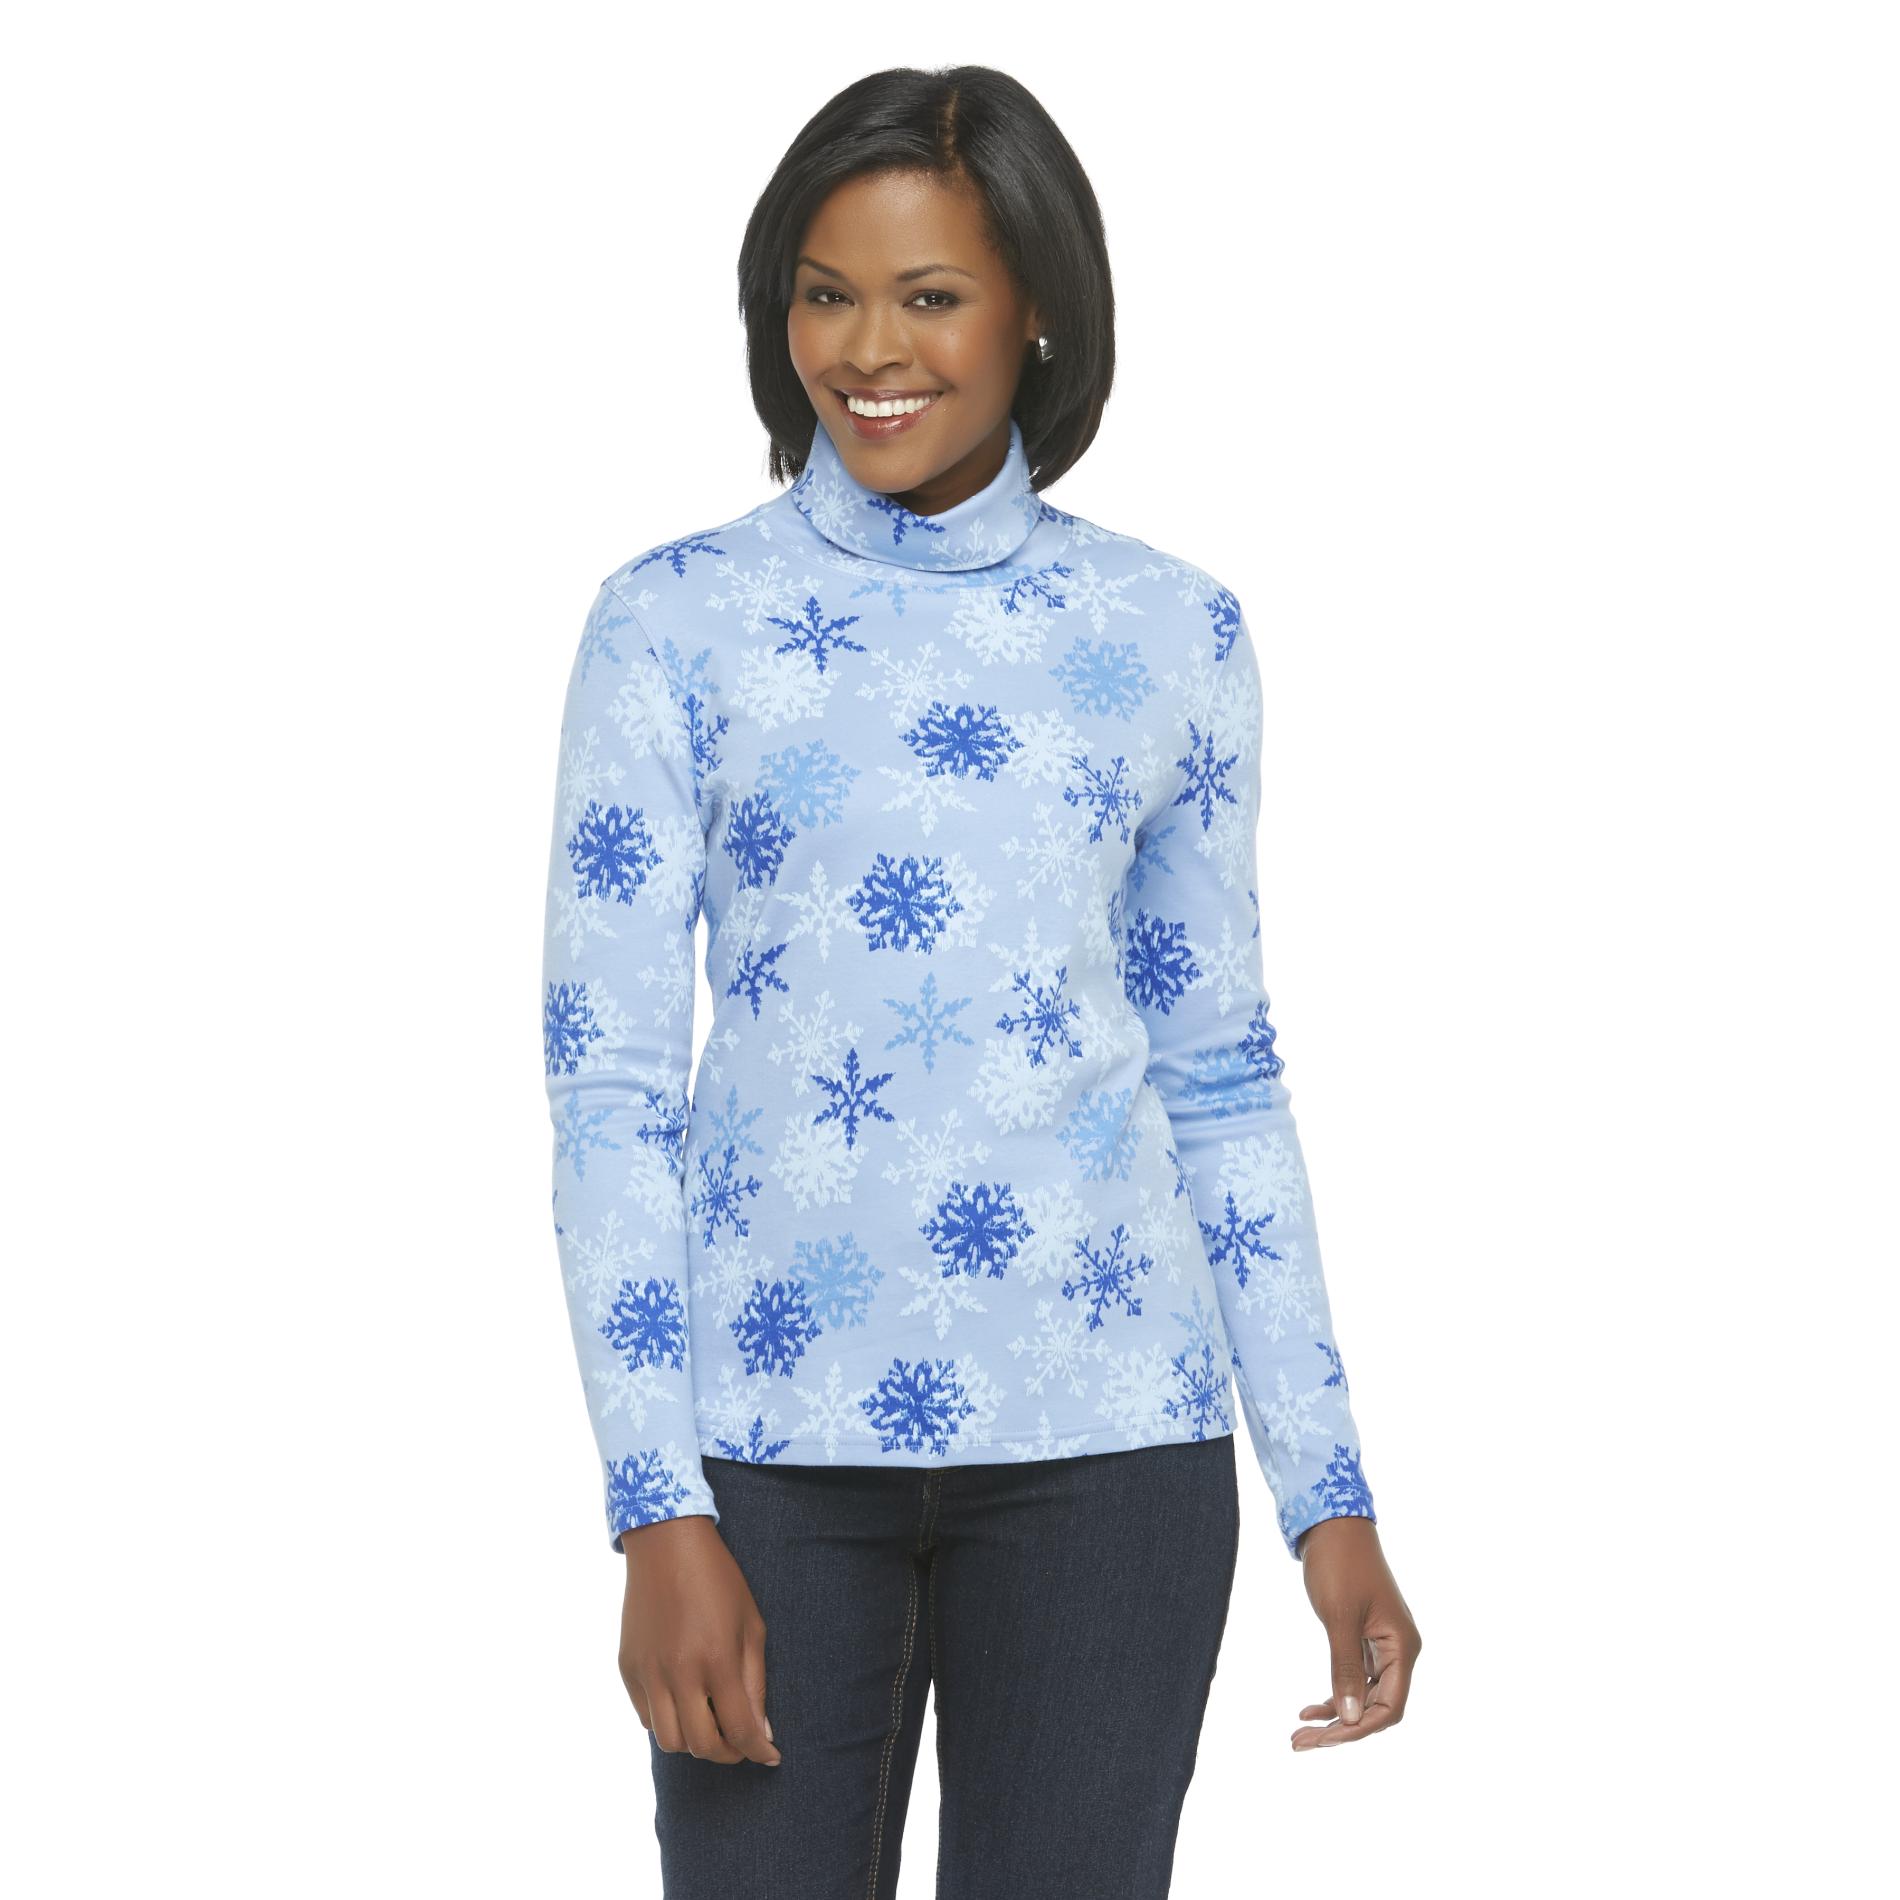 Holiday Editions Women's Christmas Turtleneck - Snowflakes